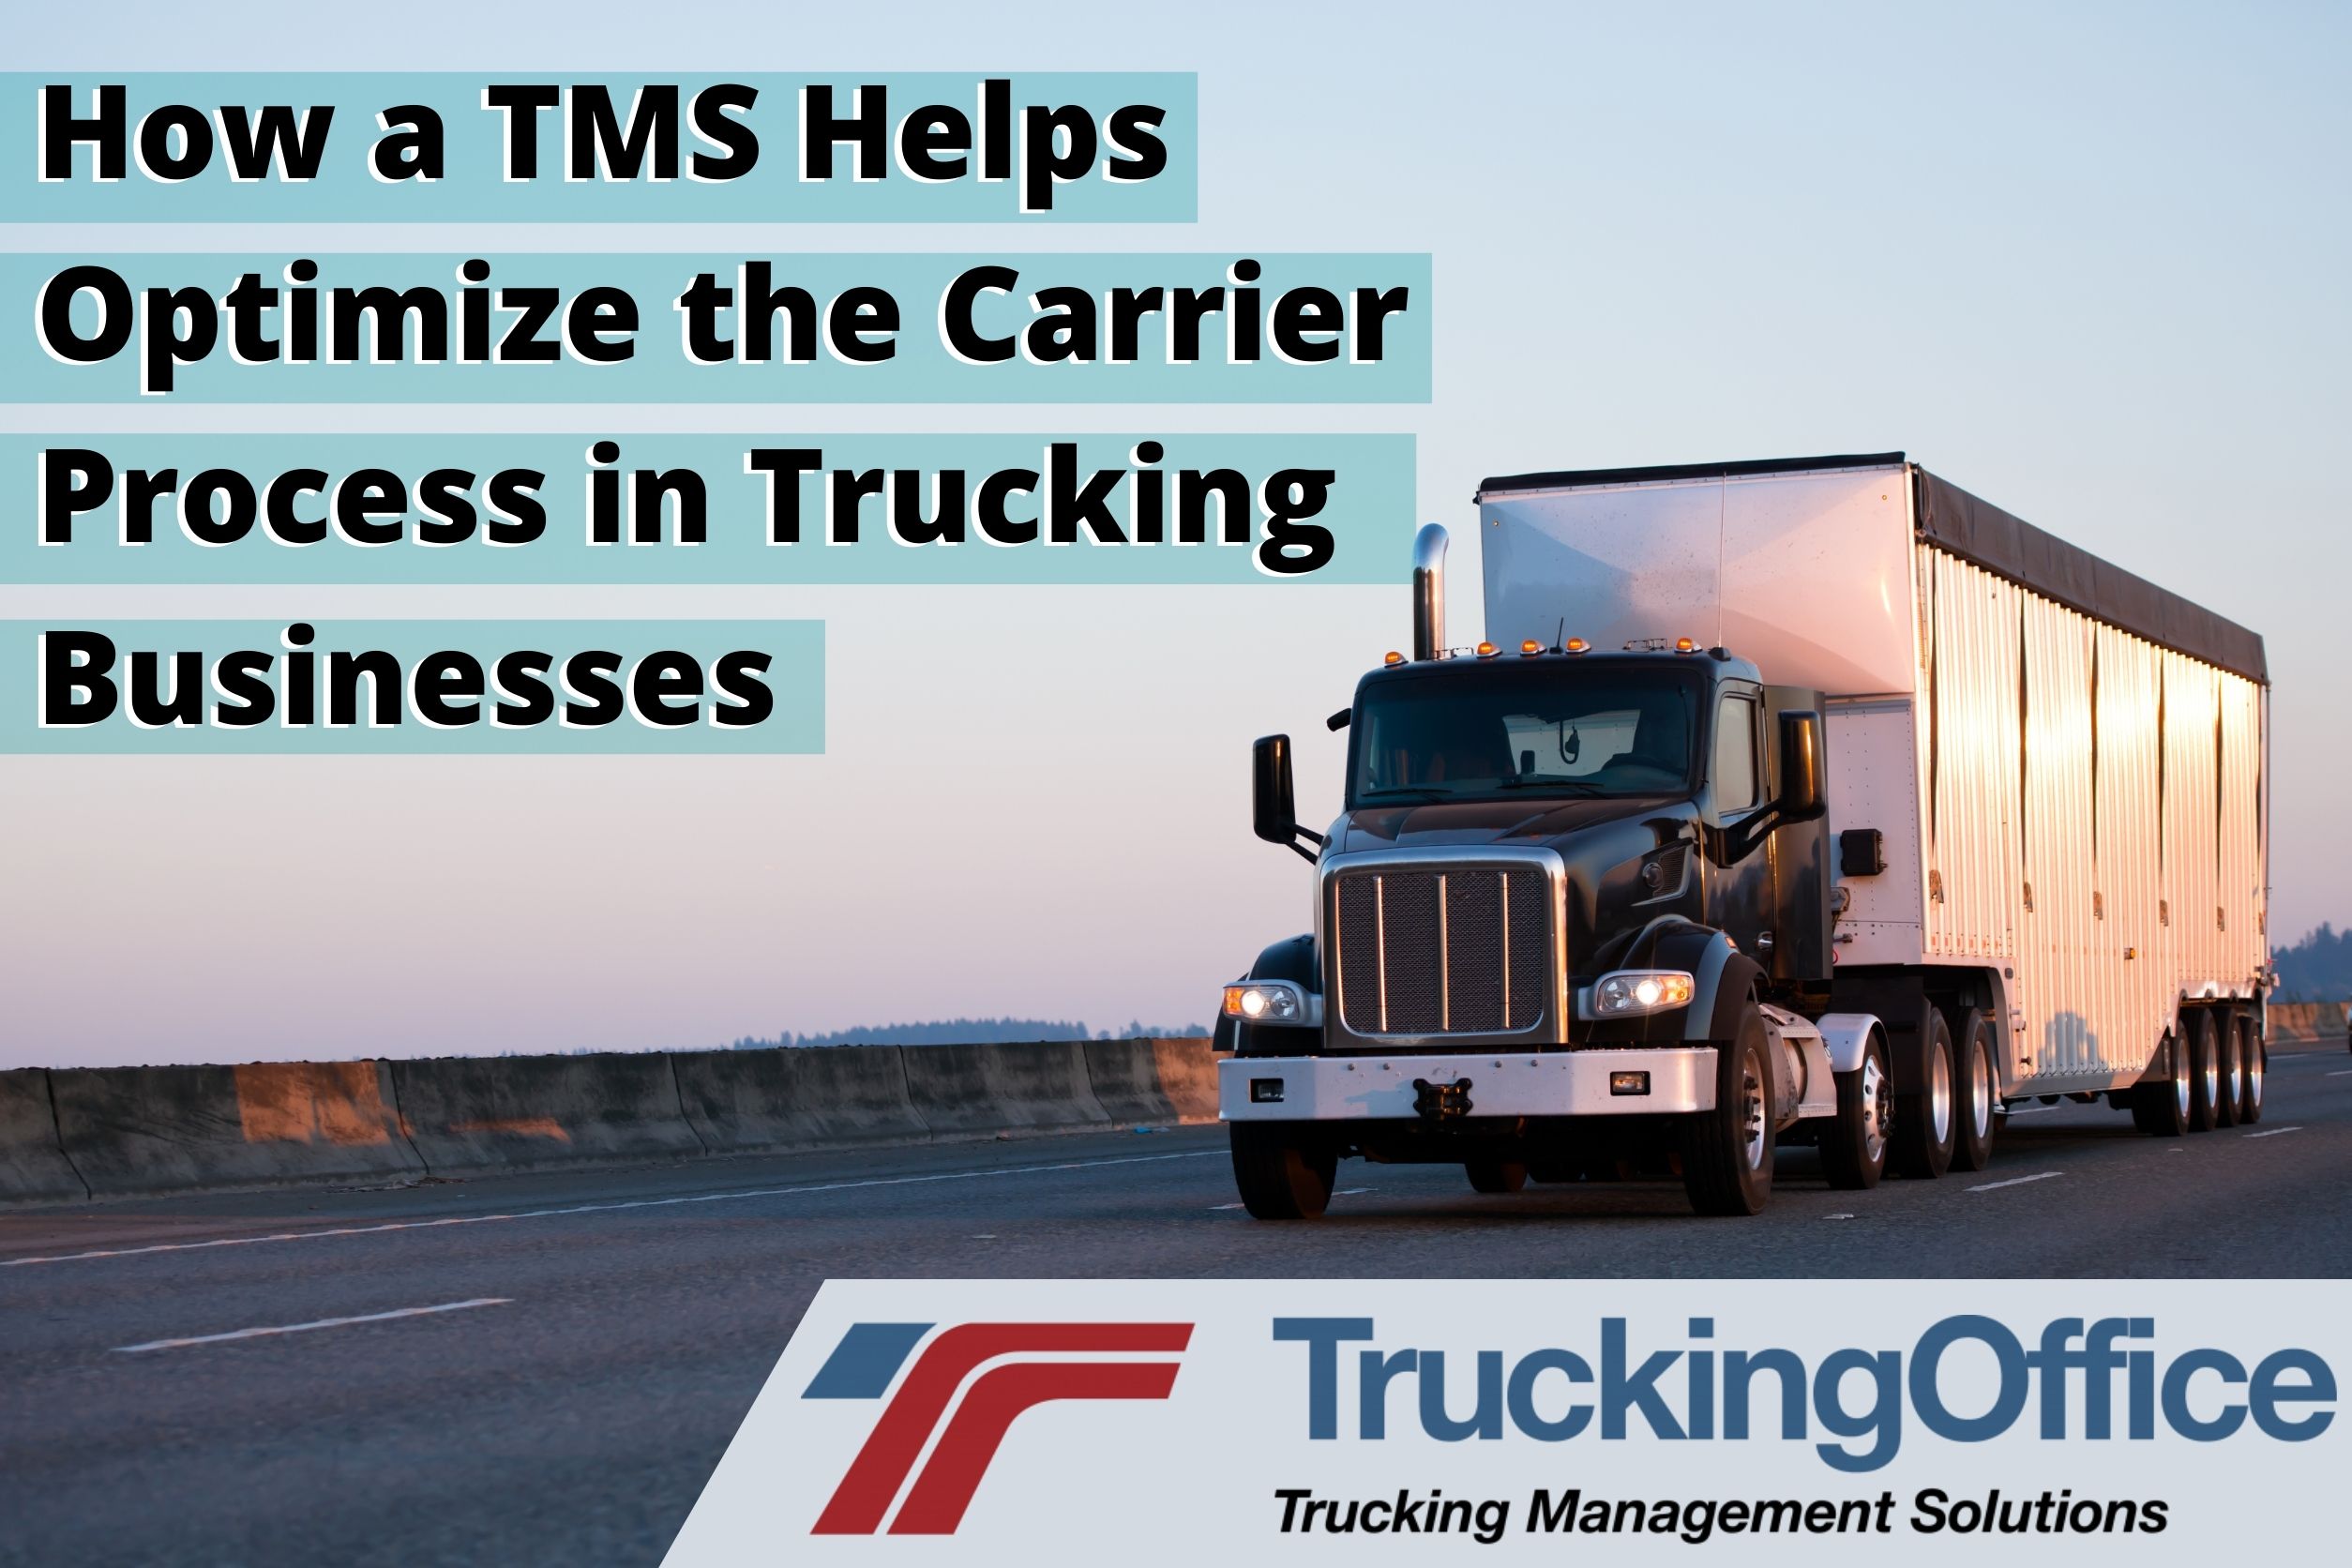 How a TMS Helps Optimize the Carrier Process in Trucking Businesses